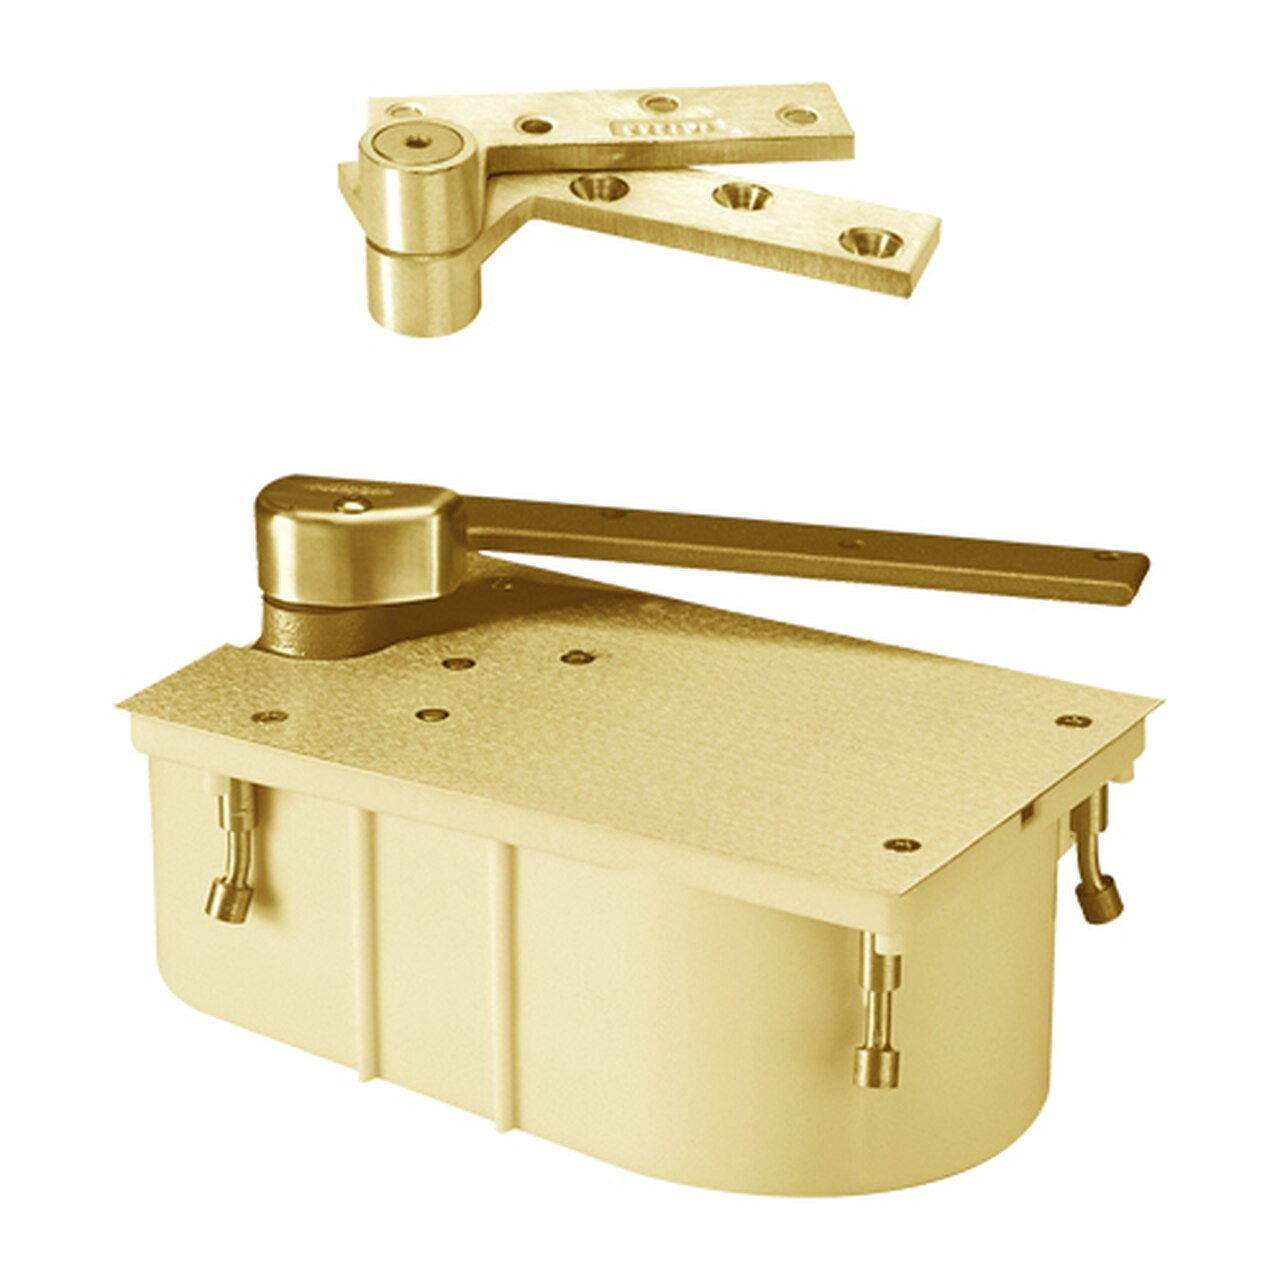 F27-95N-LFP-CWF-LH-605 Rixson 27 Series Fire Rated Heavy Duty 3/4" Offset Hung Floor Closer in Bright Brass Finish